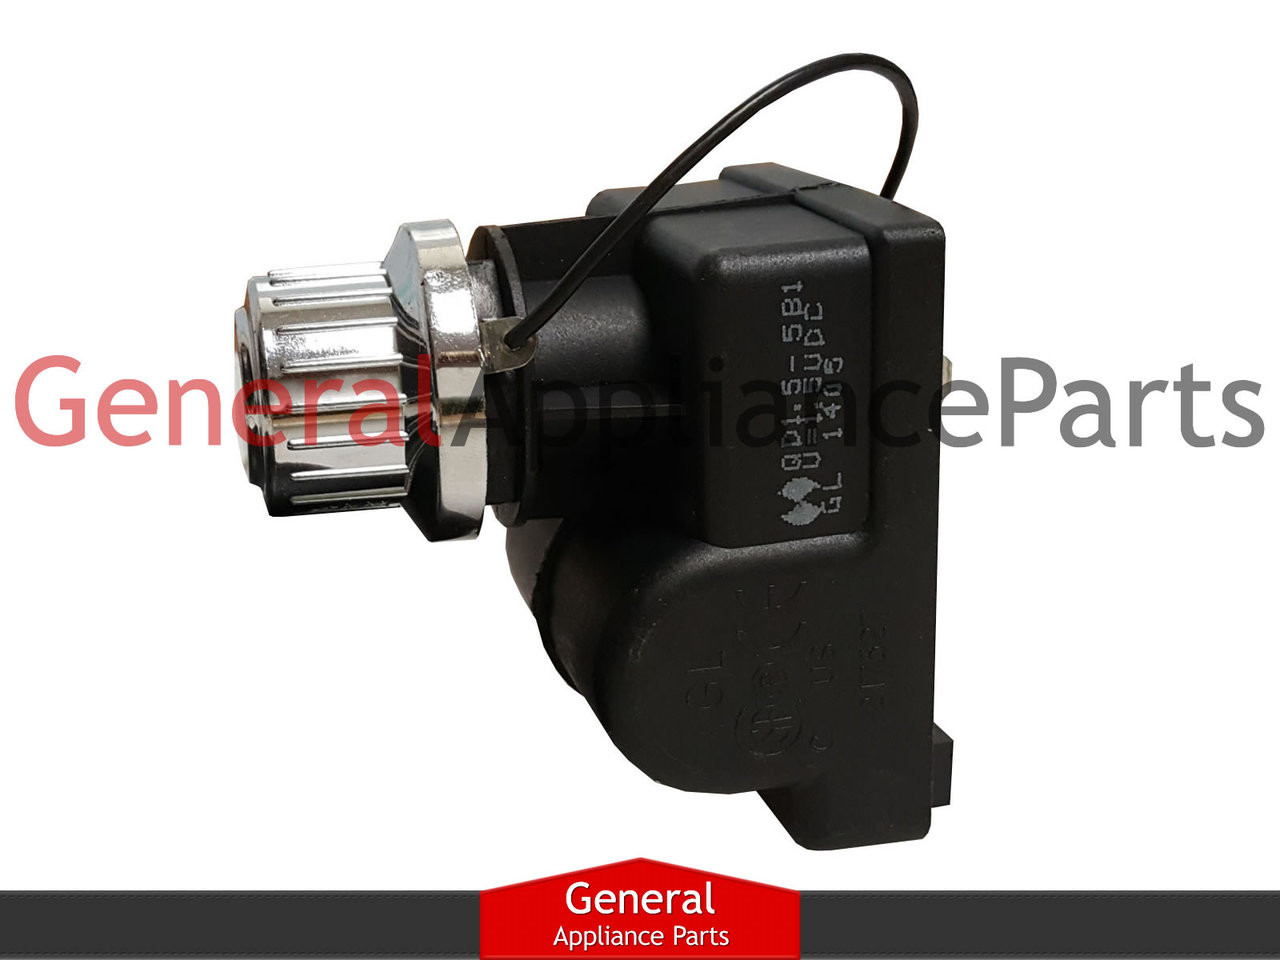 ClimaTek Grill BBQ Ignitor Igniter Switch Replaces Jenn-Air # NEX200828  200828 - General Appliance Parts